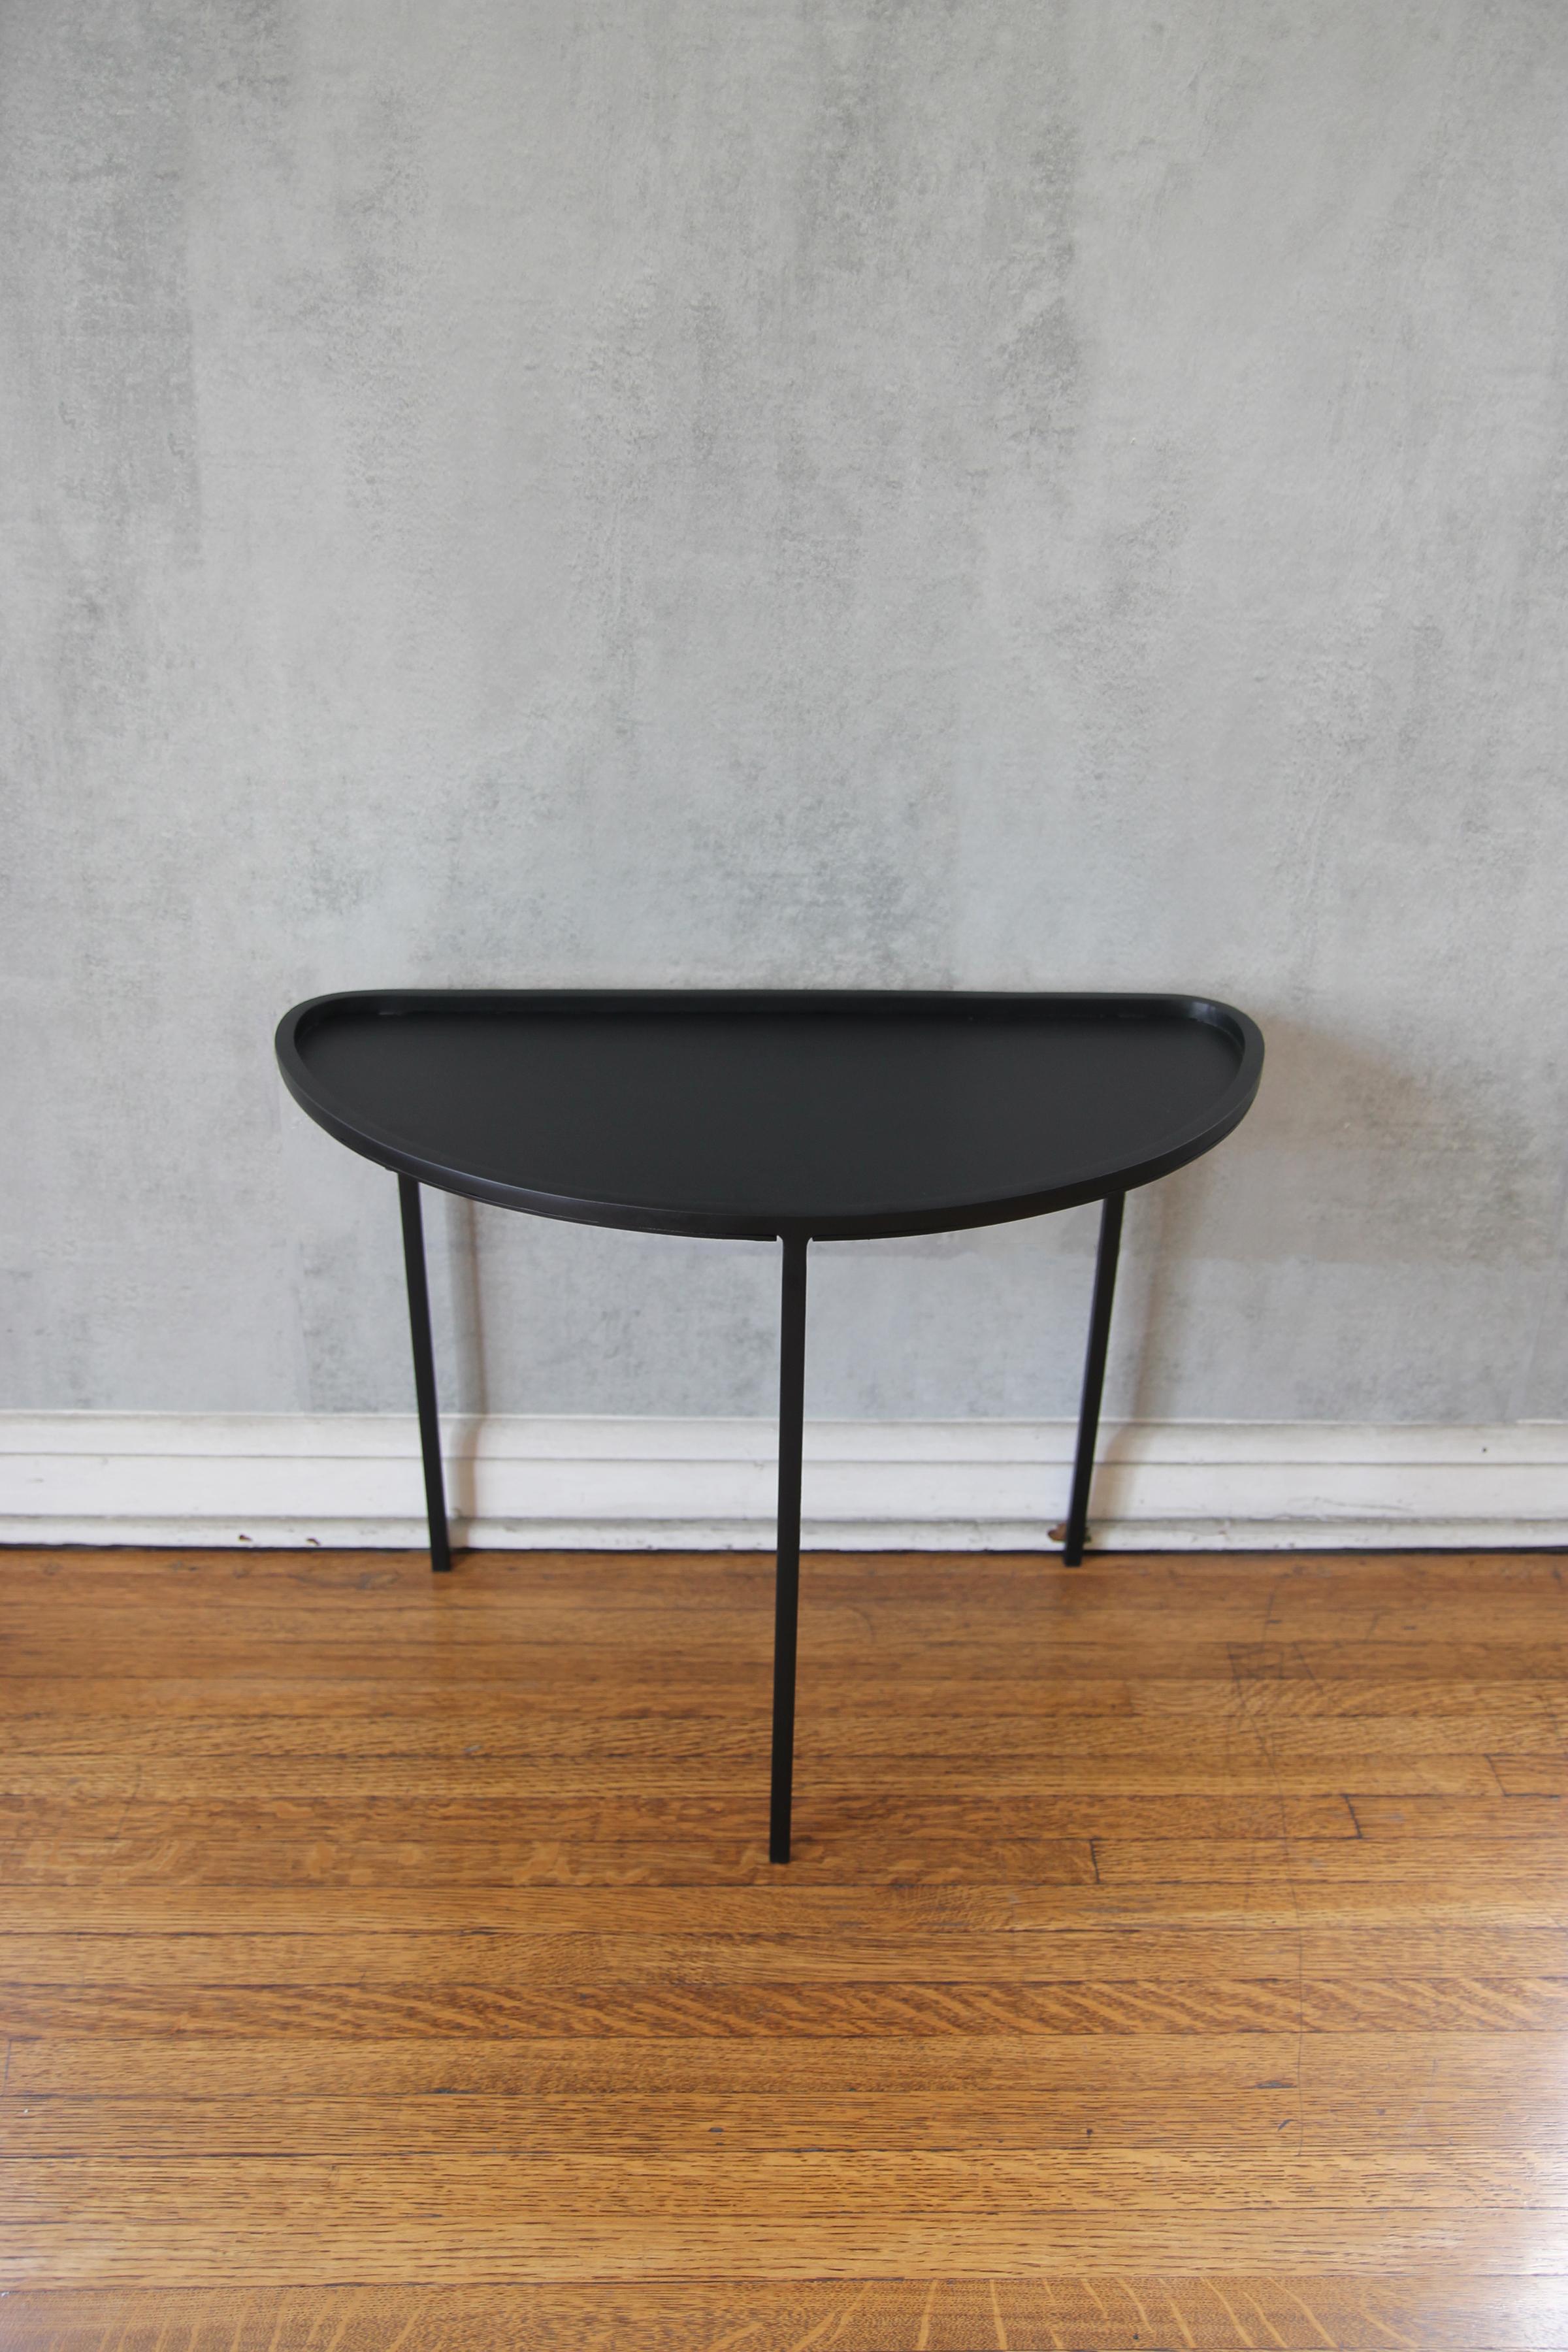  'Demi-Lune' Three Legs Blackened Steel Side Table by Understated Design In New Condition For Sale In Los Angeles, CA